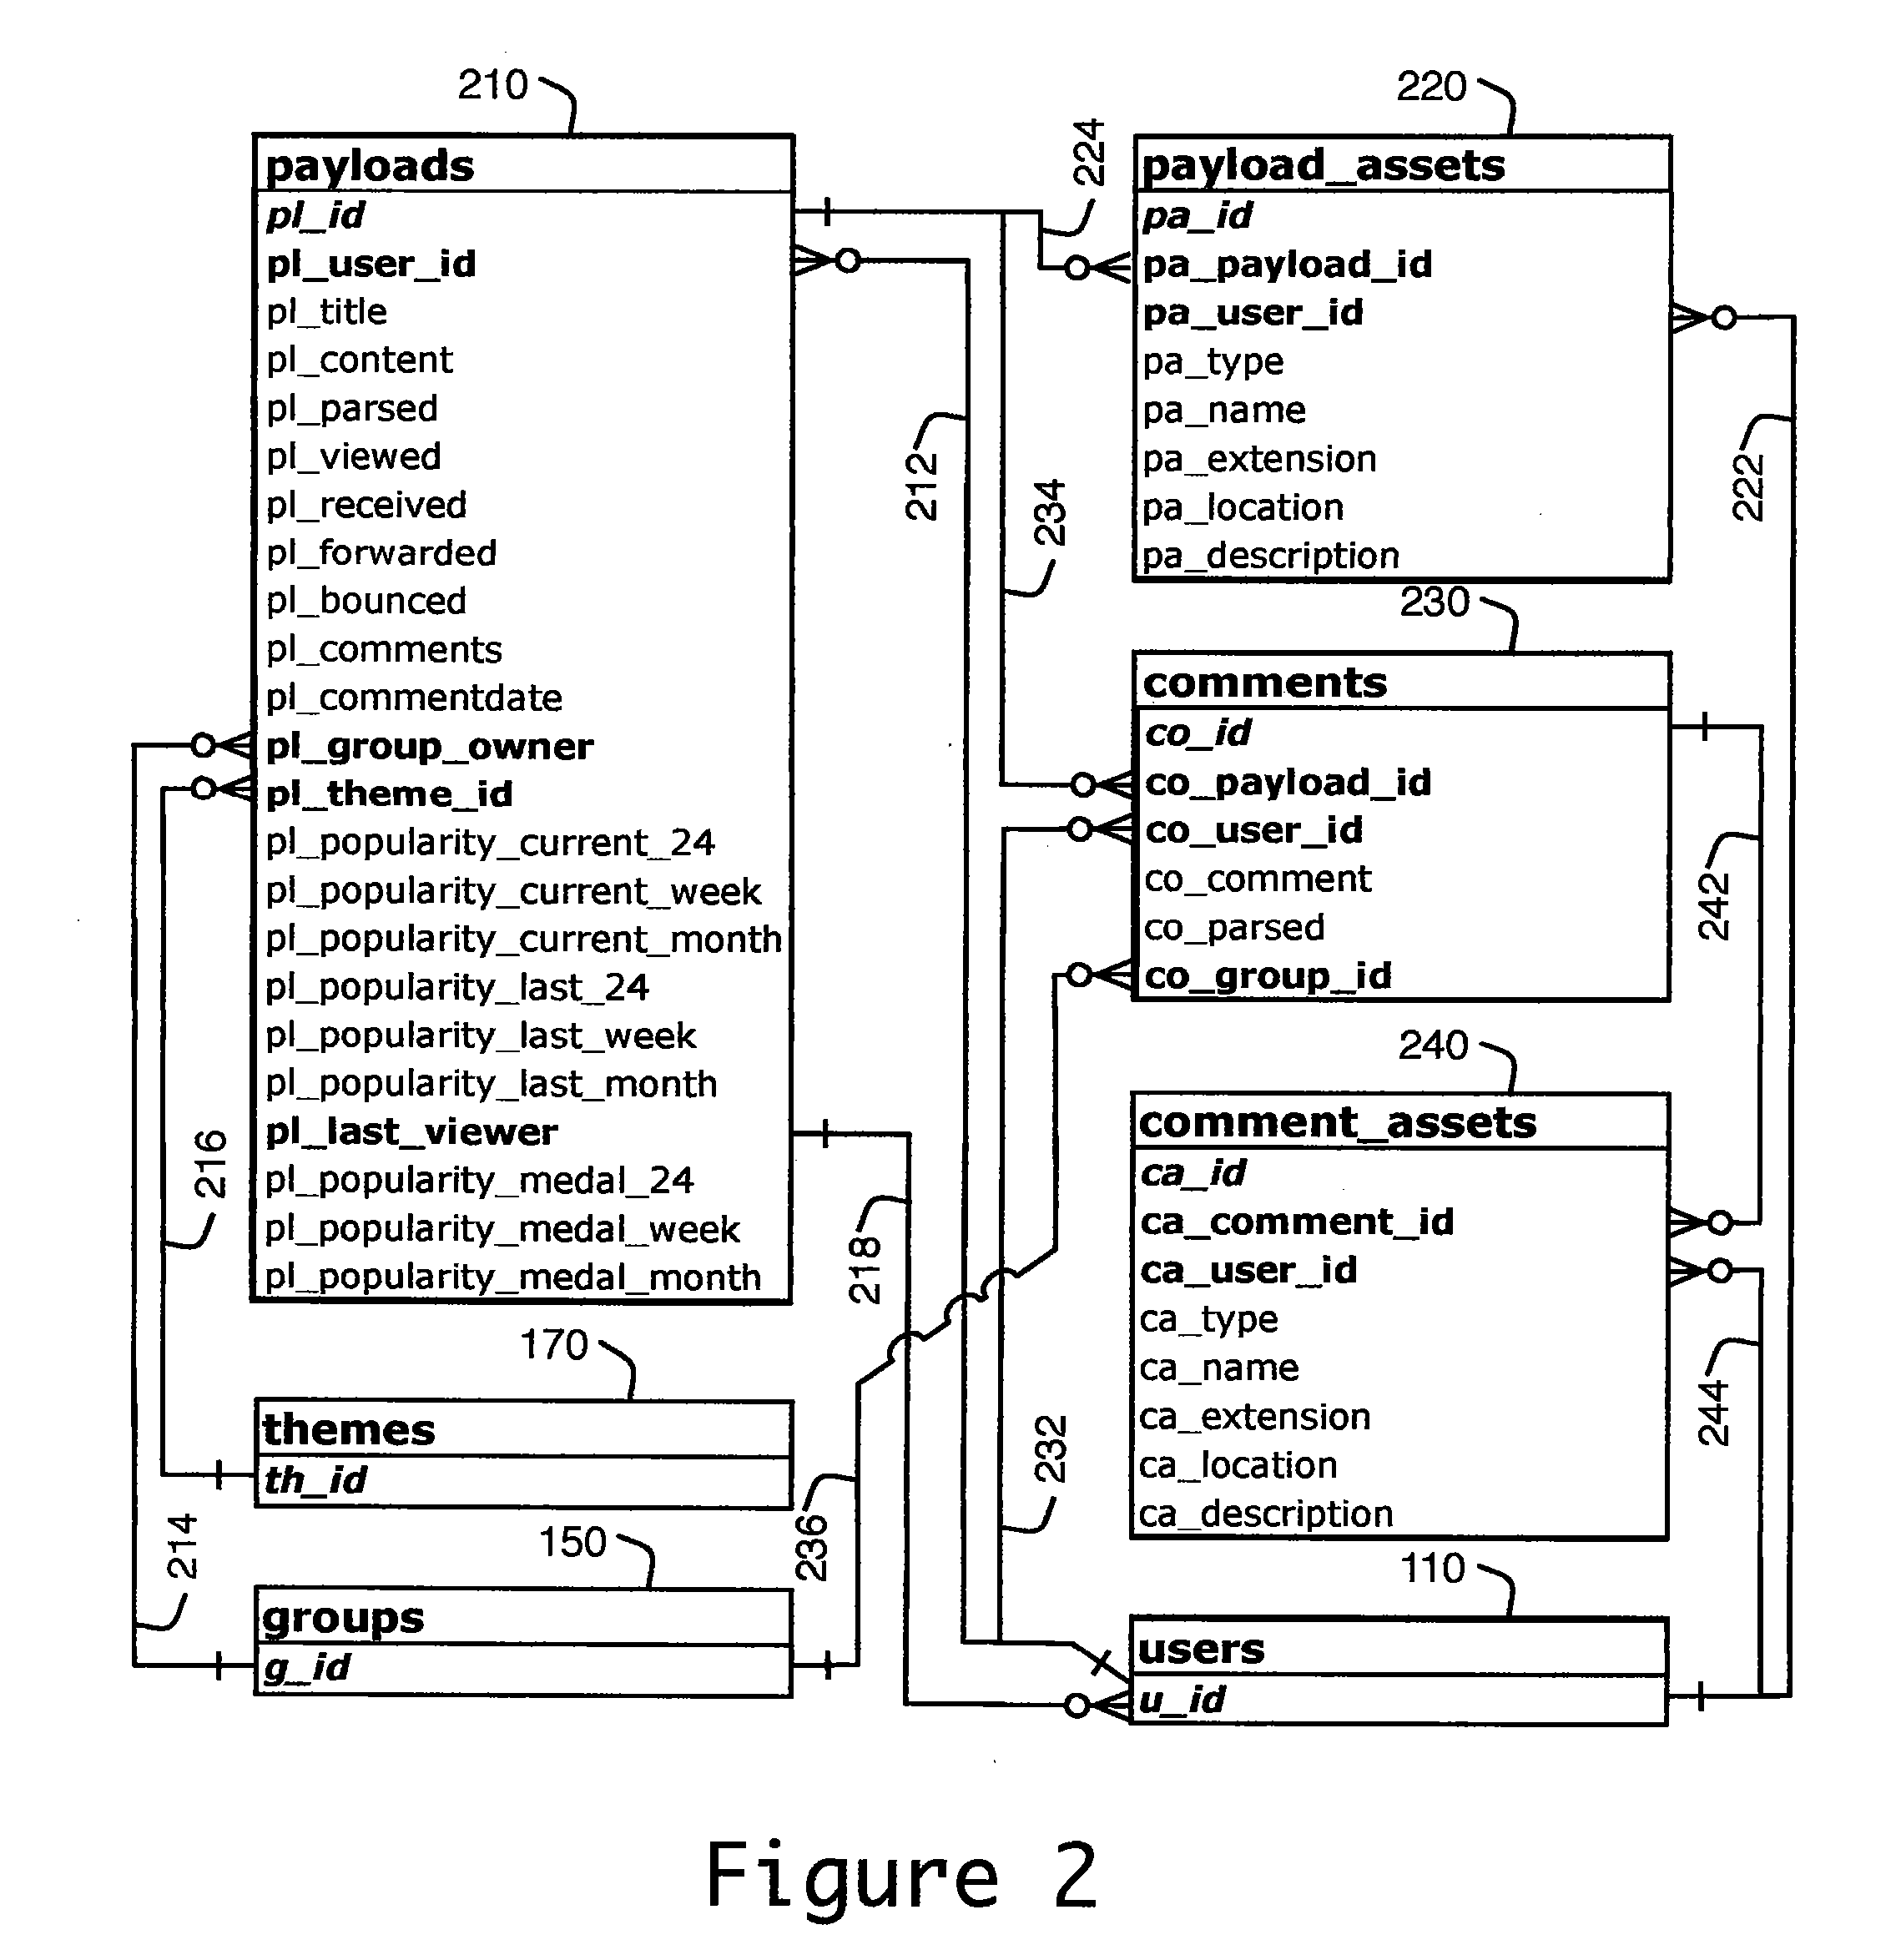 Method and apparatus for improved referral to resources and a related social network